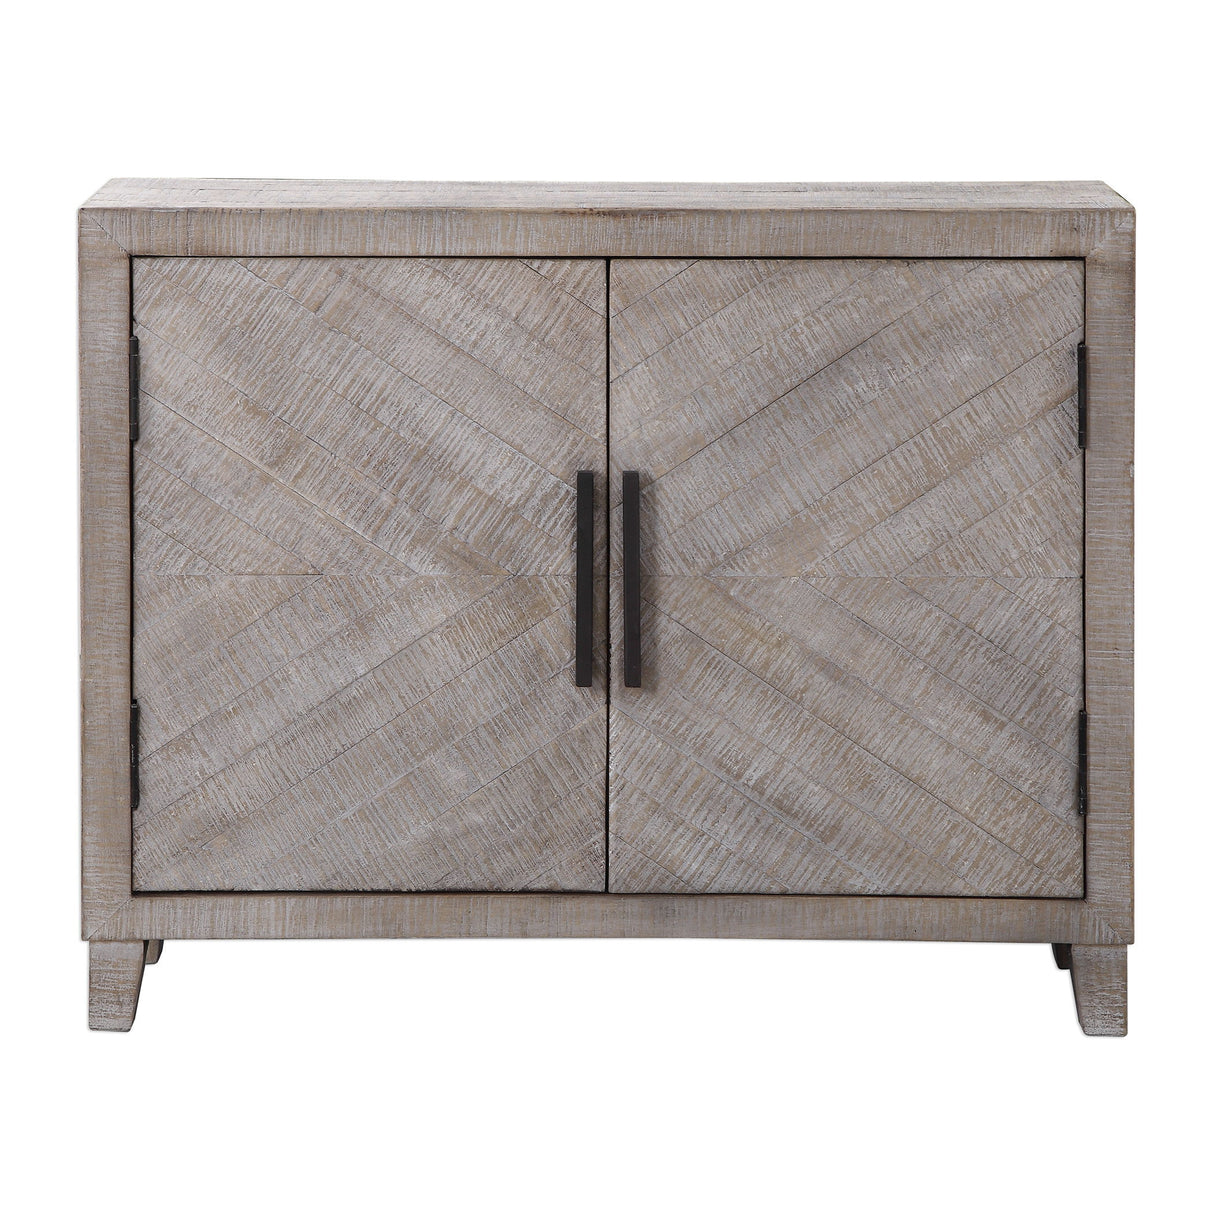 Adalind - Washed Accent Cabinet - White Washed